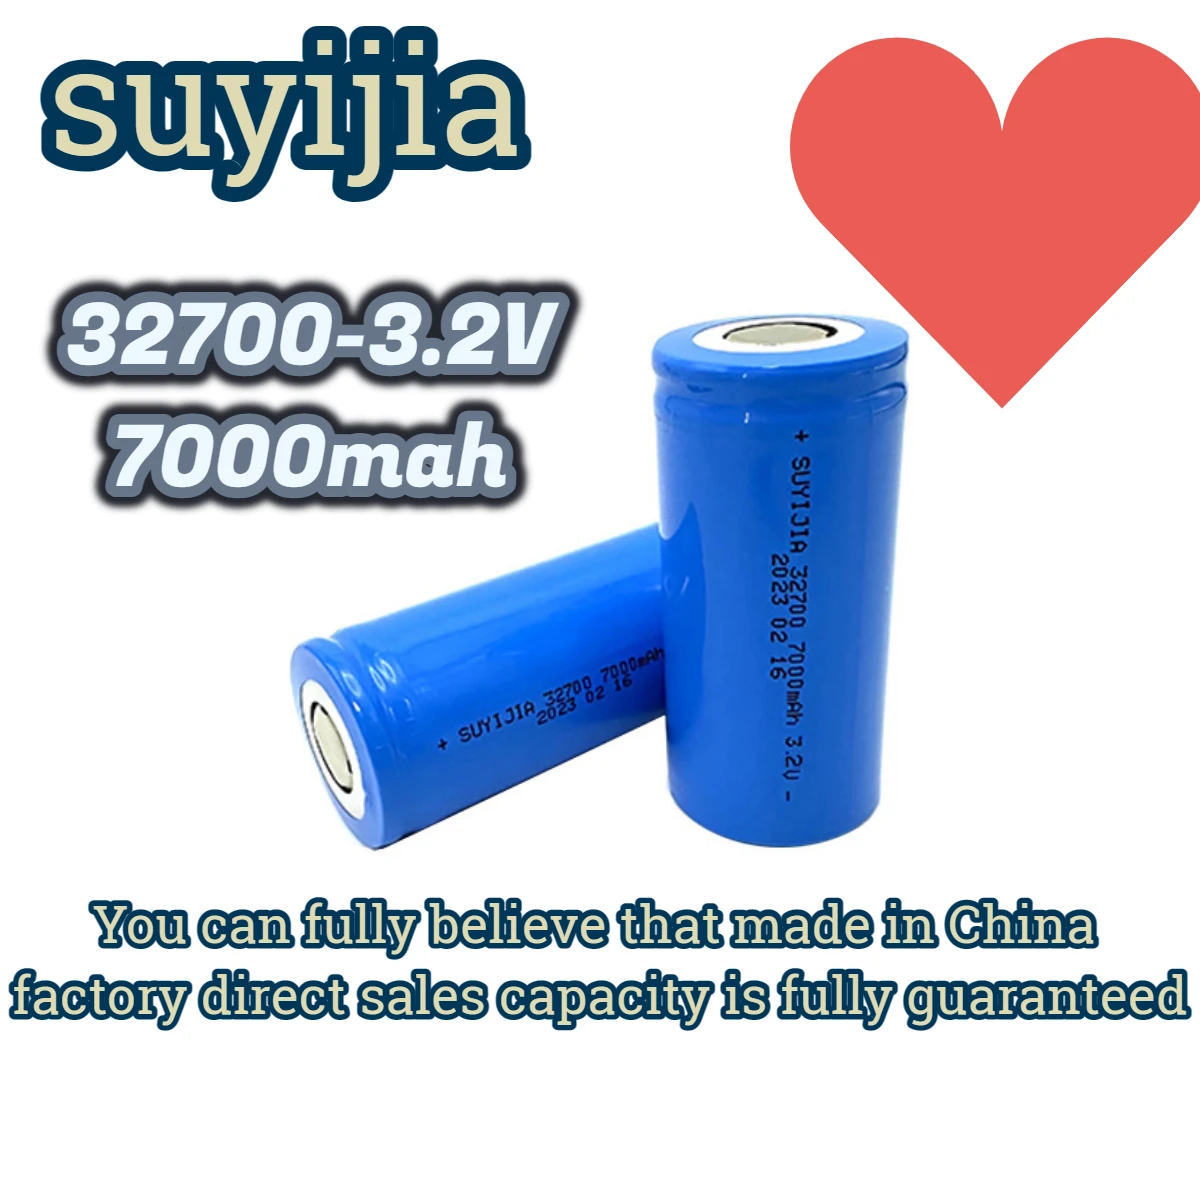 

original 32700 32V 7000mah specification lithium cell rechargeable battery lifepo4 Lithium titanate for remote control drones